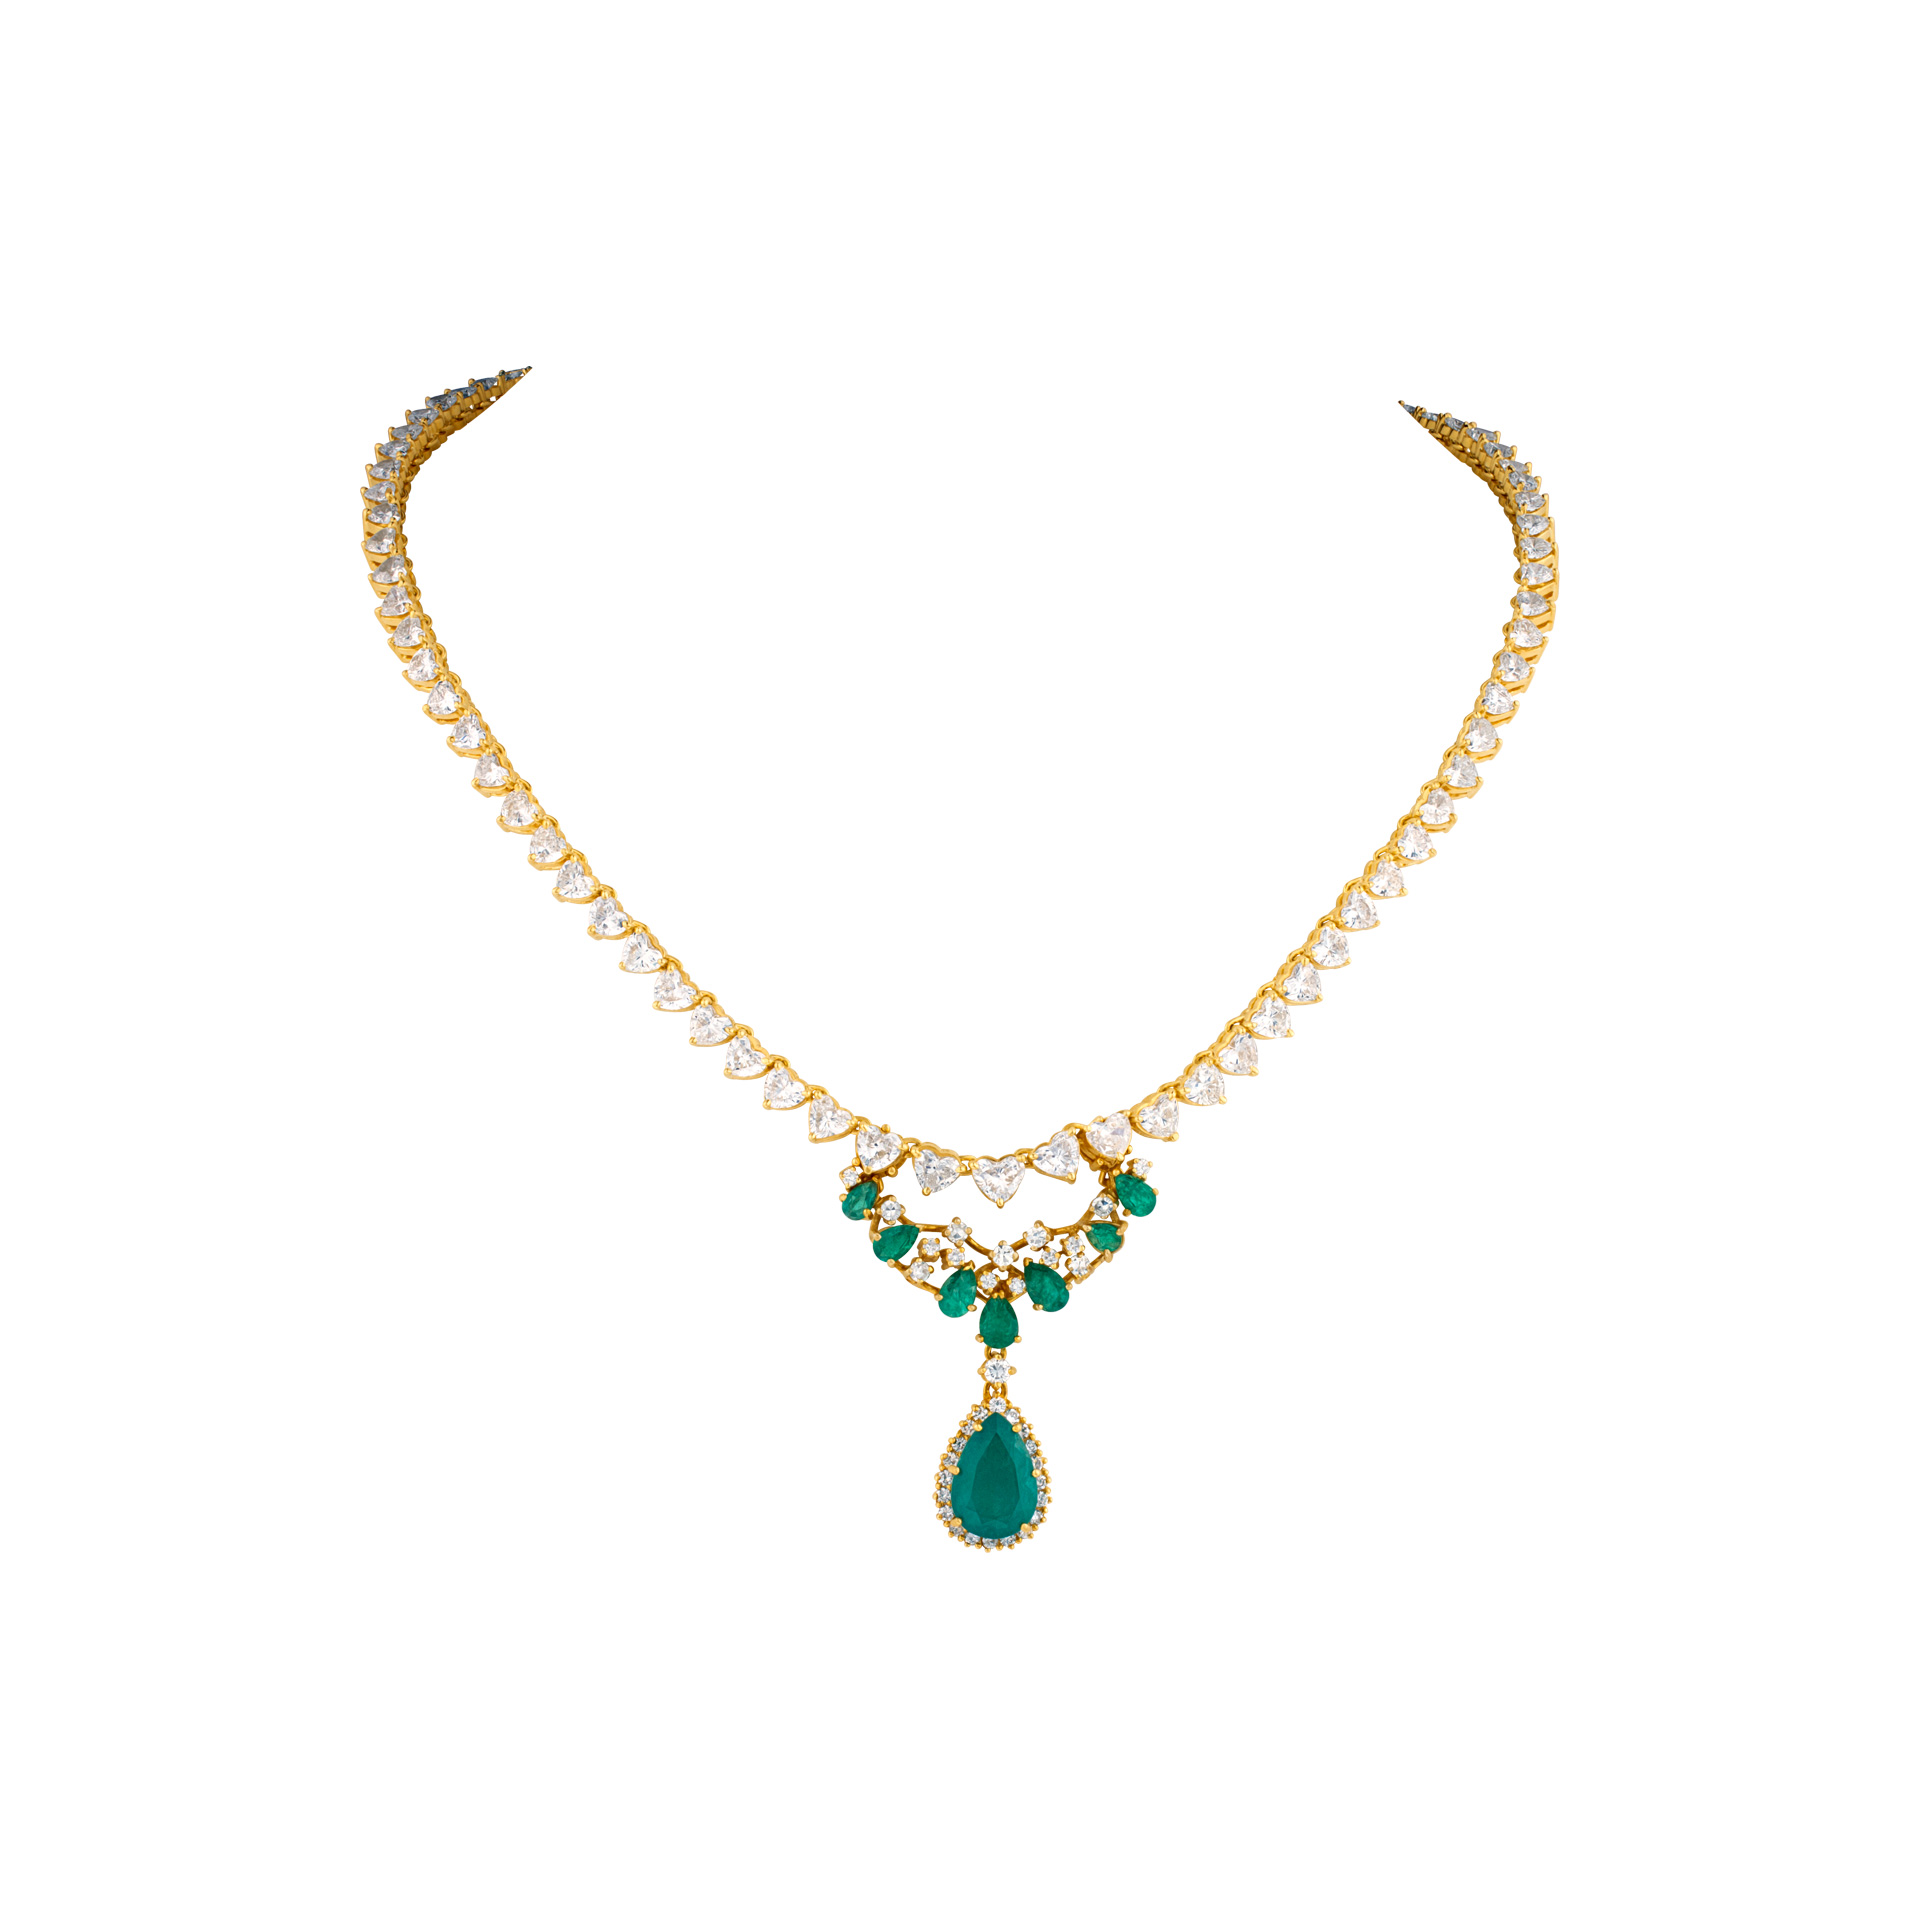 Heart shaped diamond necklace in 18k yellow gold w/ removable emerald pendant drop